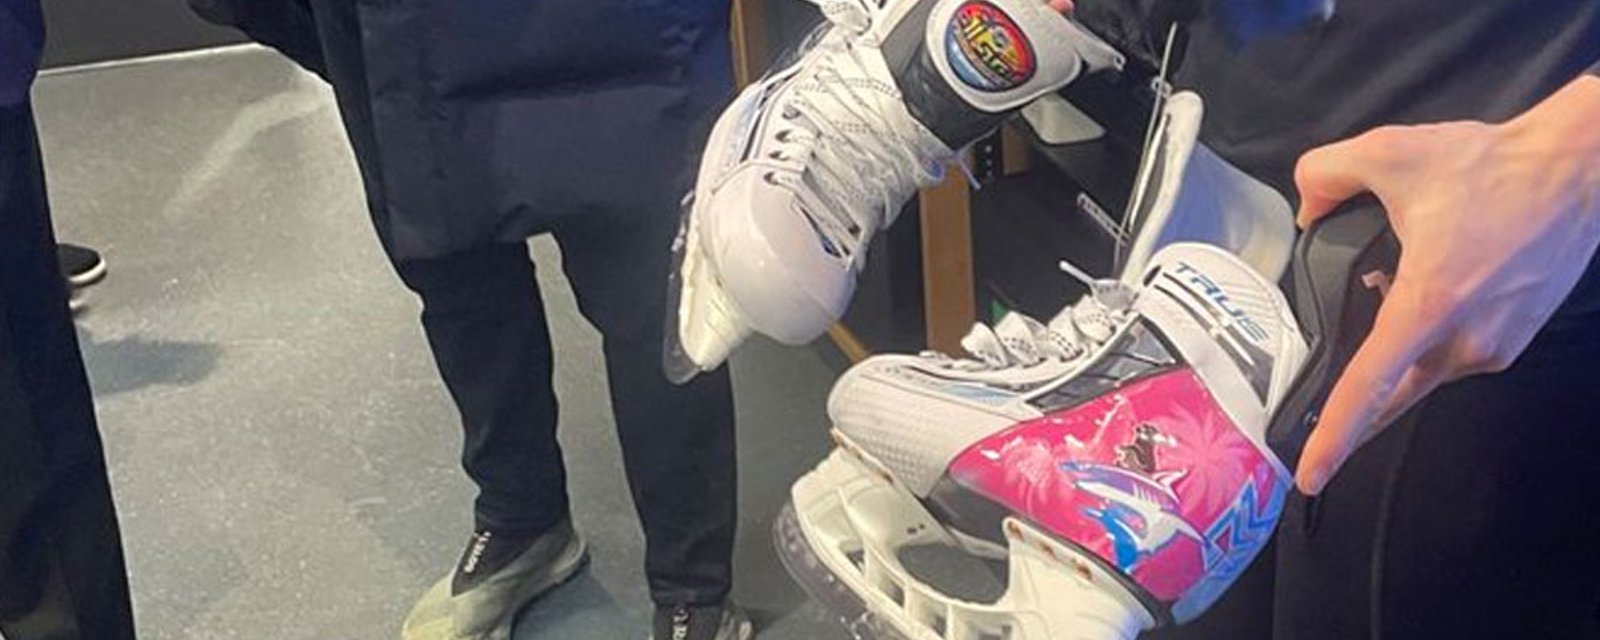 Mitch Marner shows off custom “Miami Vice” skates for NHL All-Star Game